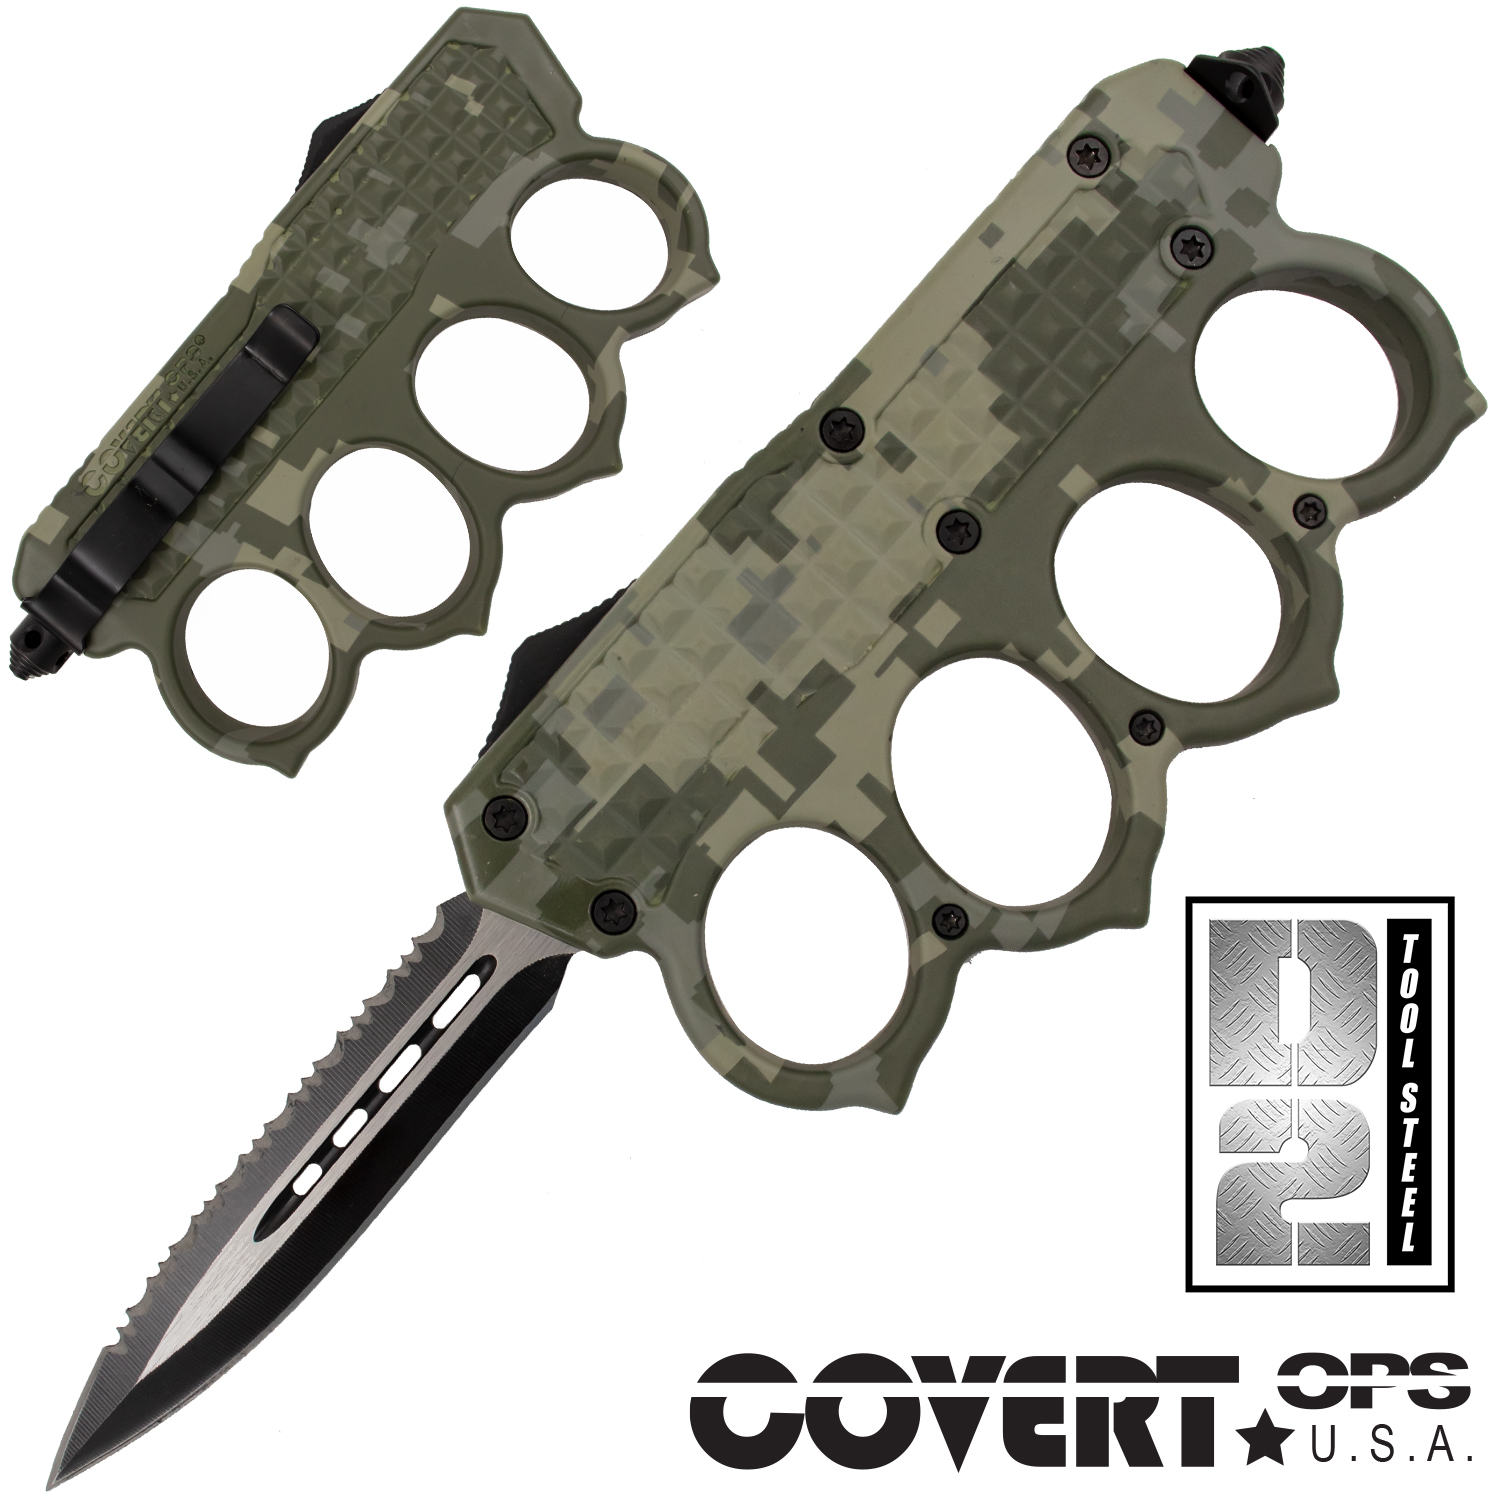 TA12 Automatic OTF Knuckle Knife with Tool and Carrying Case DE Serr (Camo)